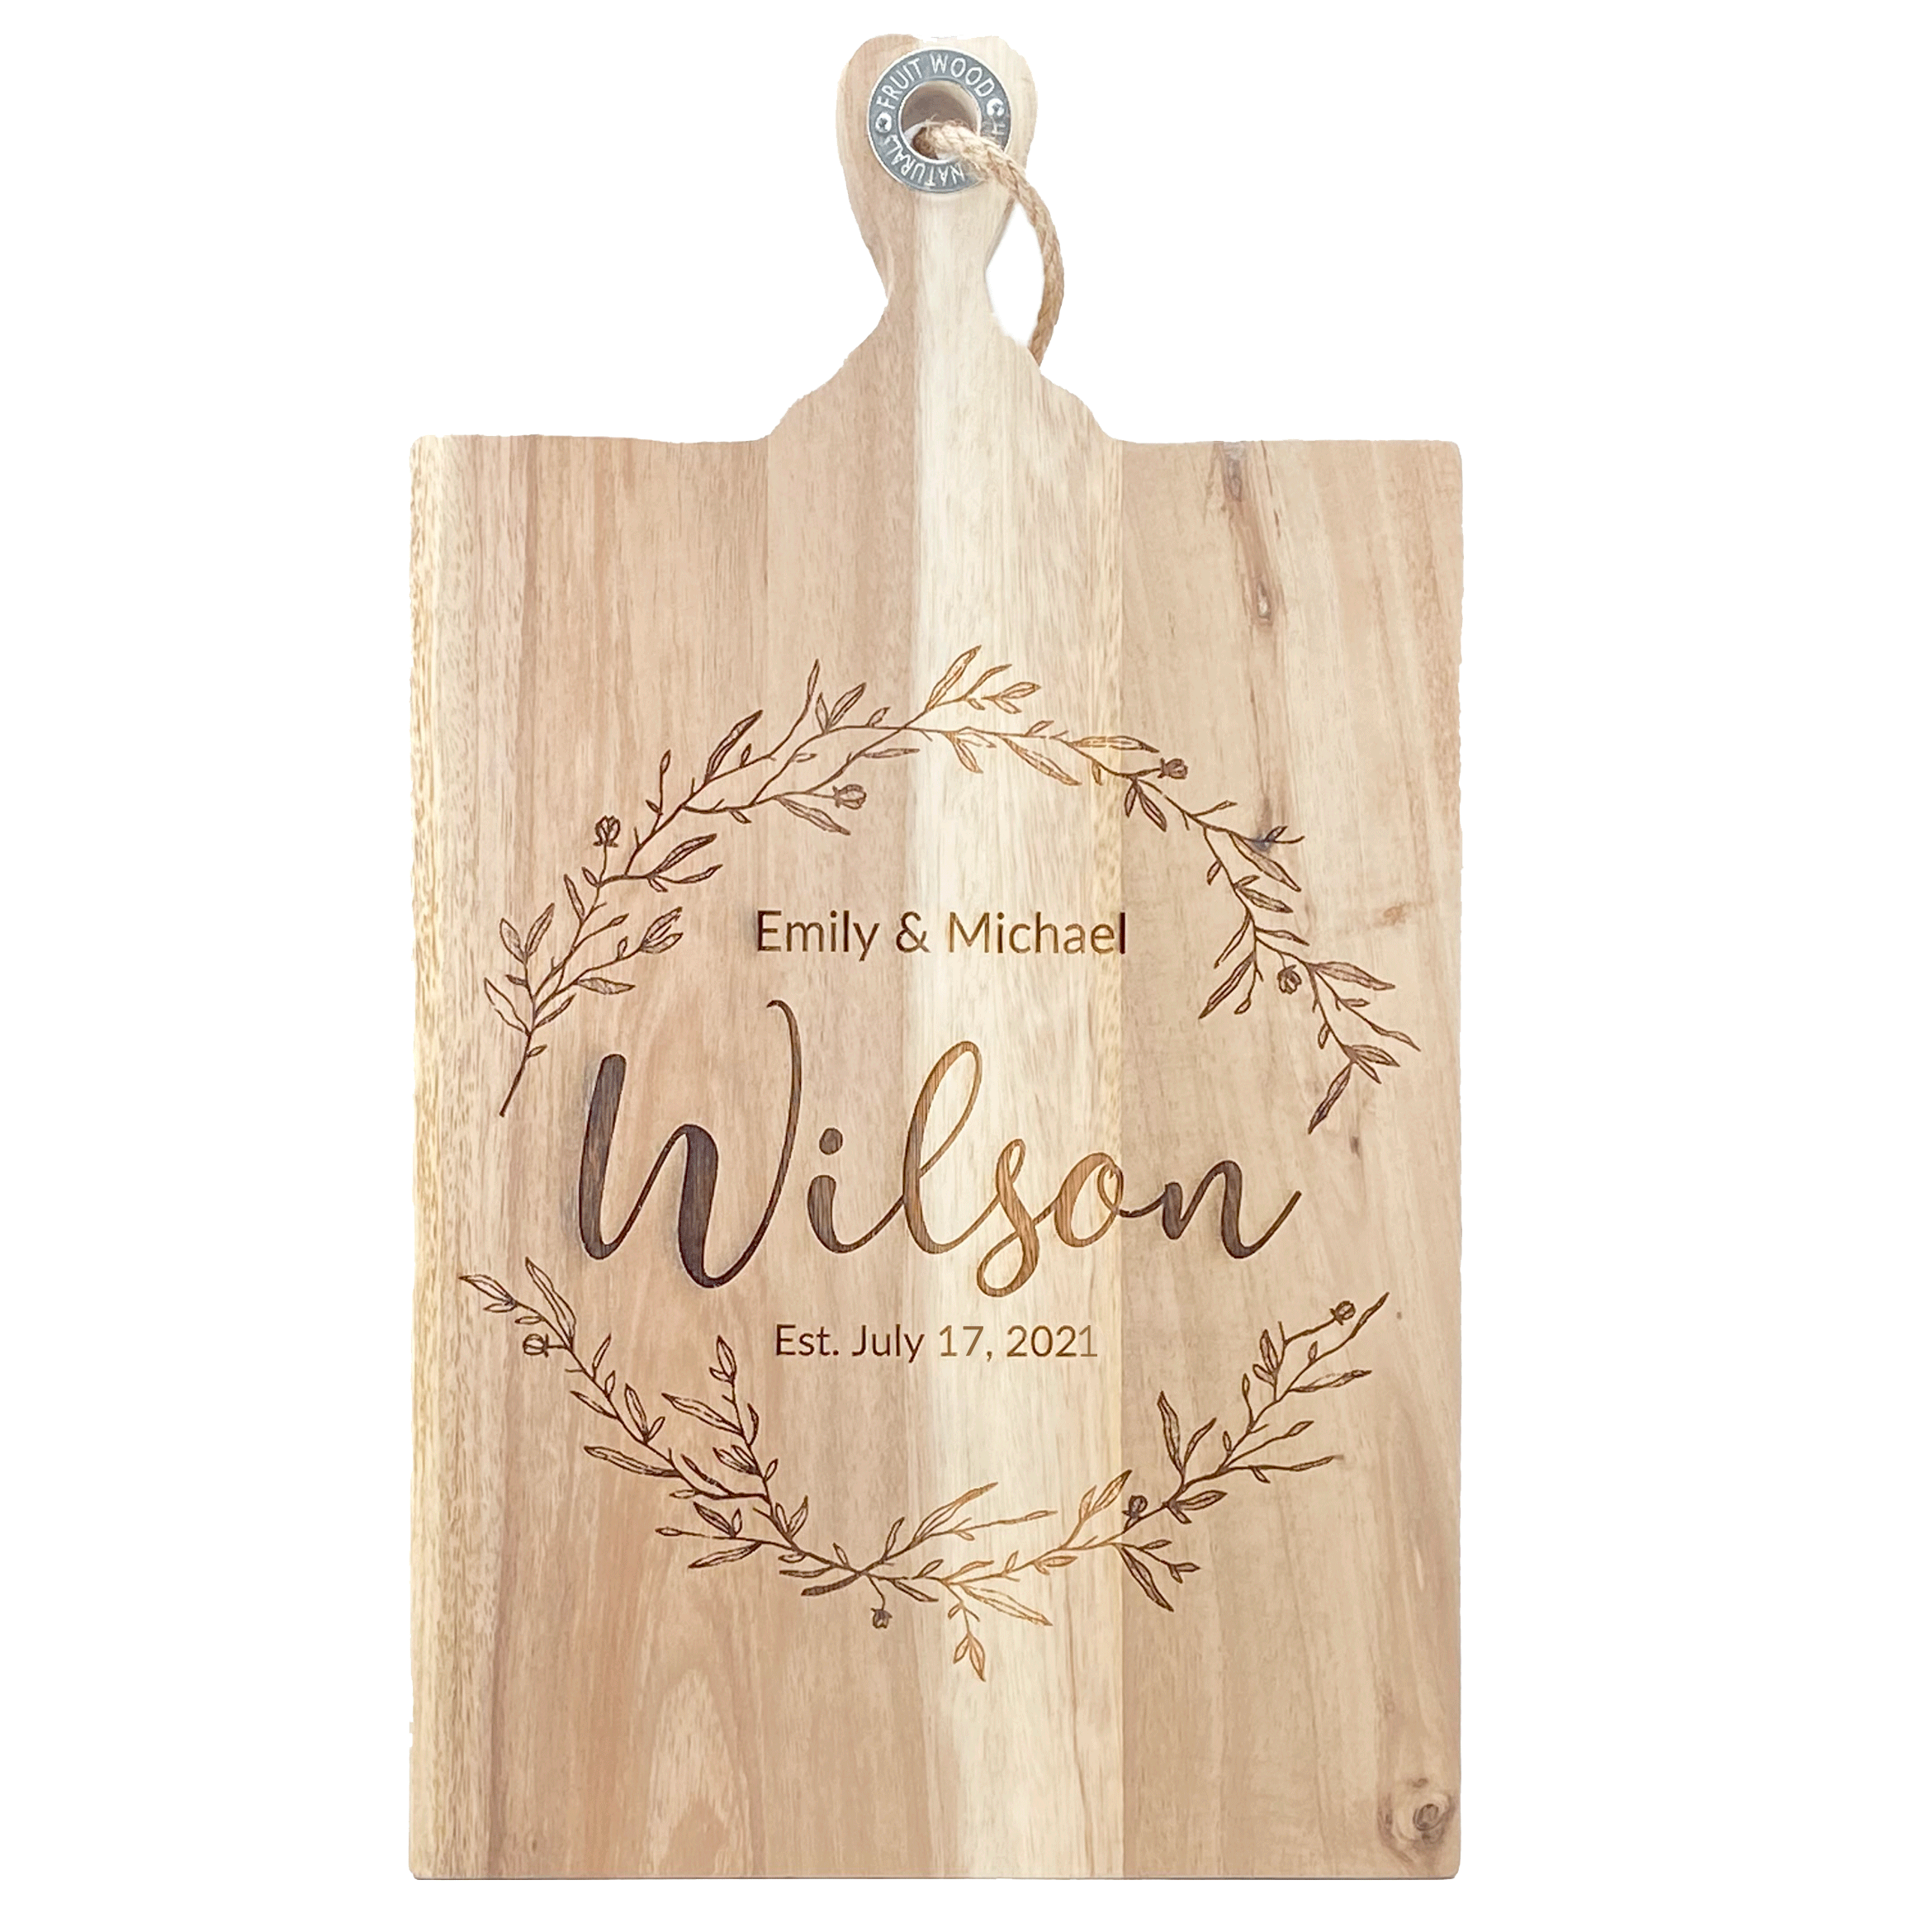 Personalized Fish Shaped-Daily Bread Cutting Board – The Photo Gift